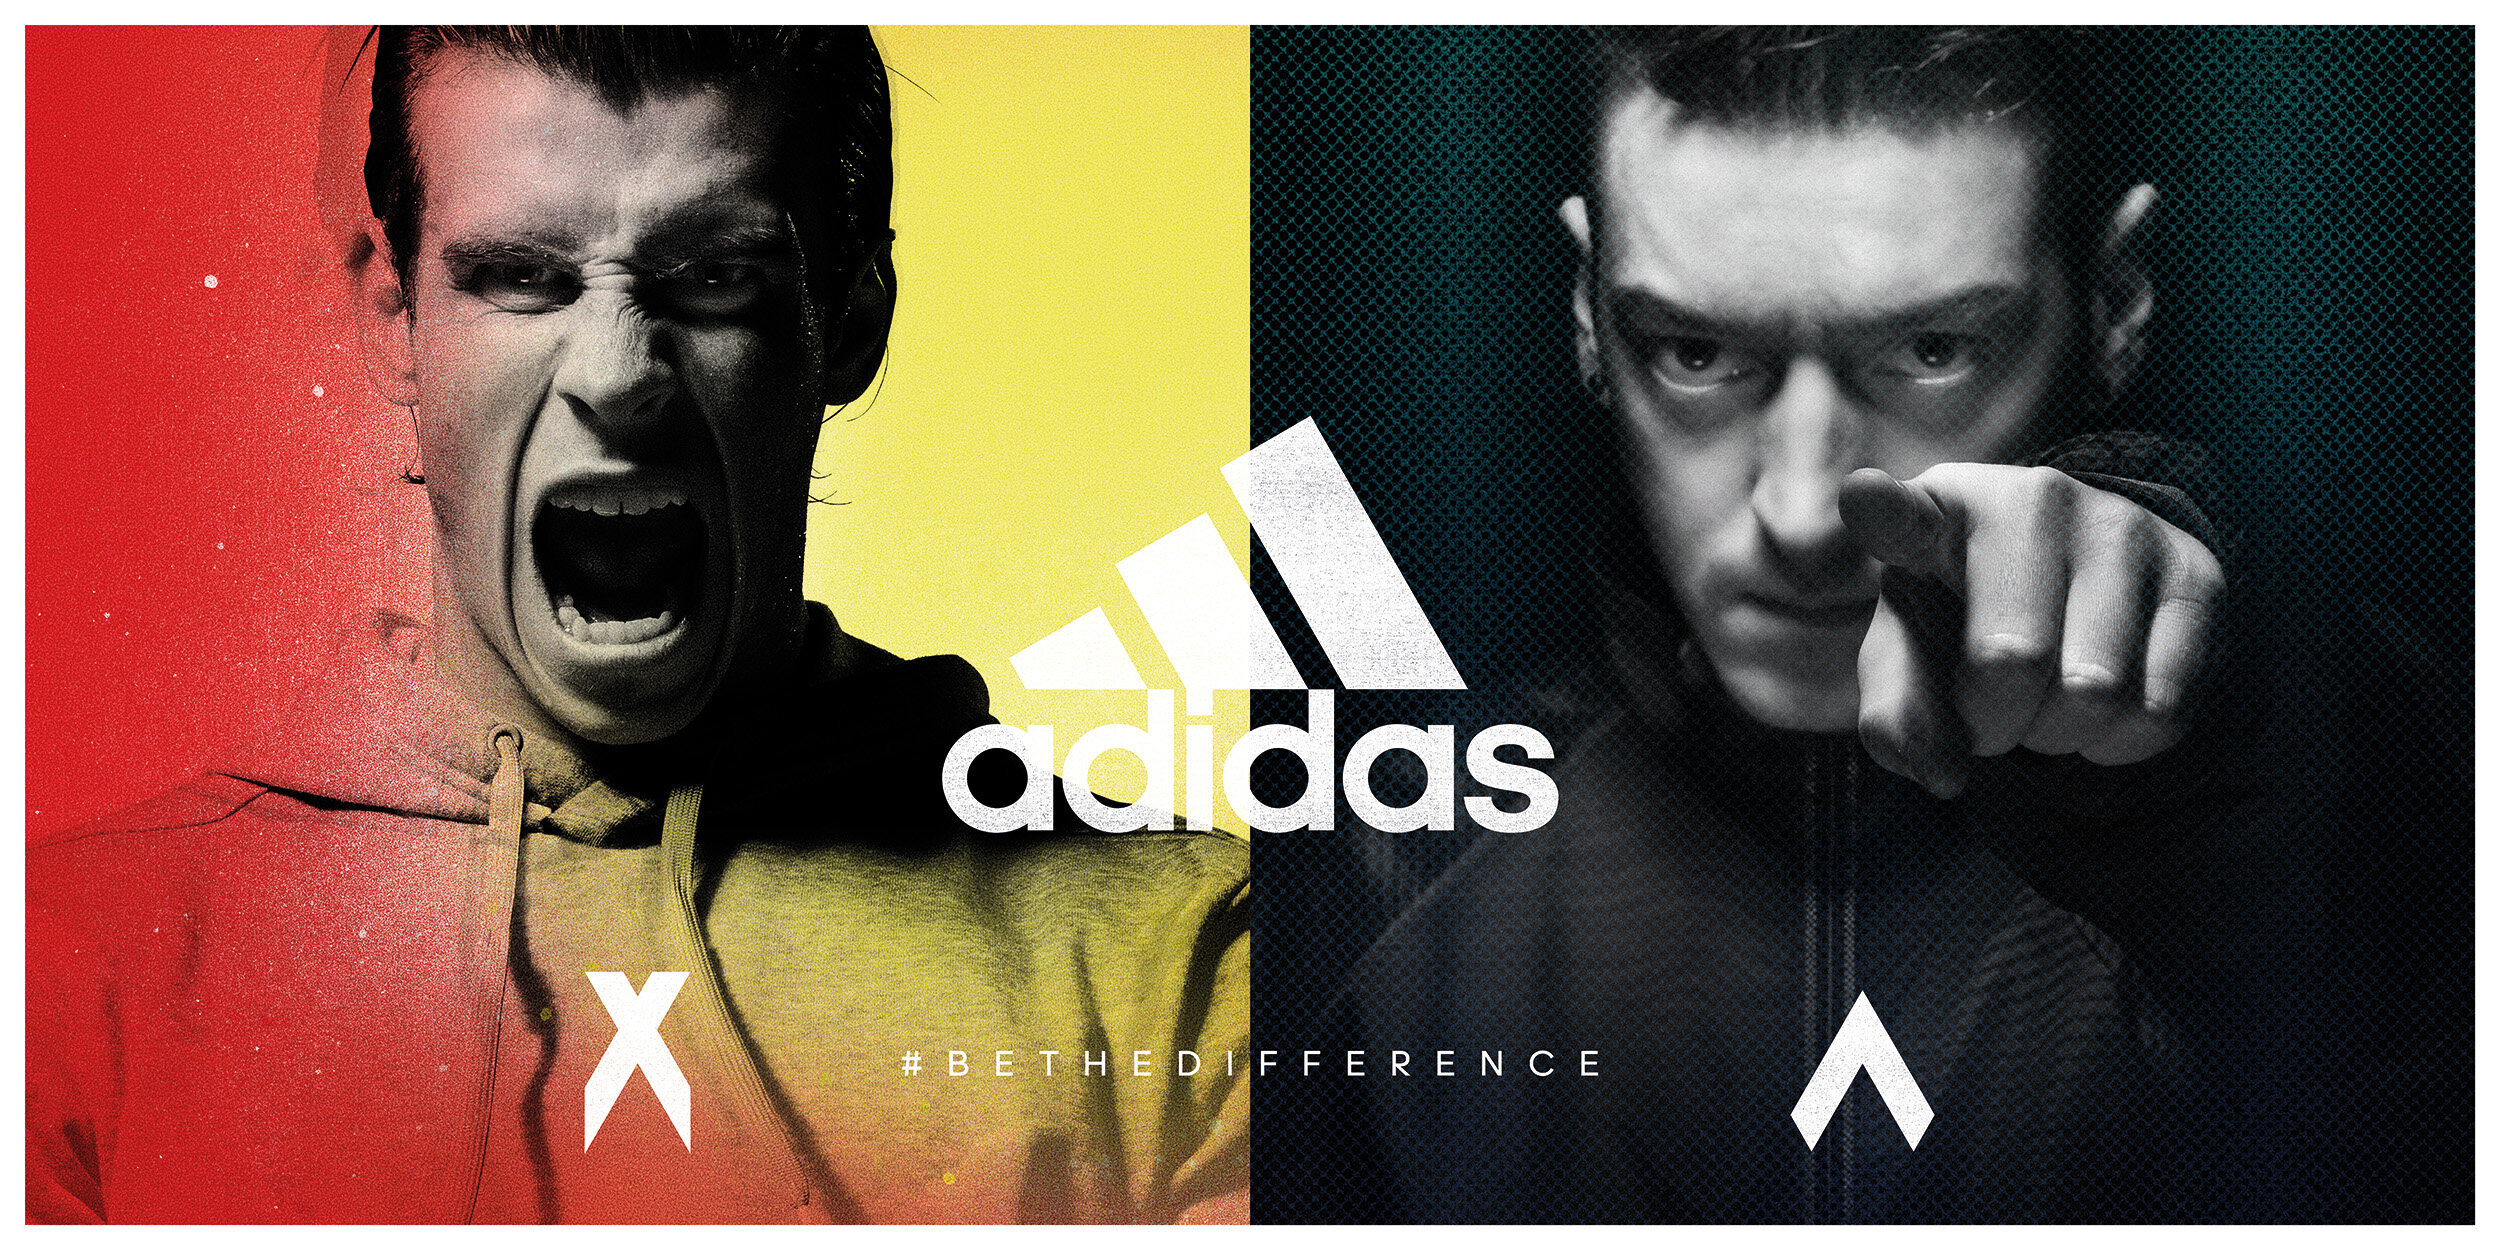 2000x1000_Adidas_DifferentRules_Combined_2 Player_Bale_Ozil.jpg